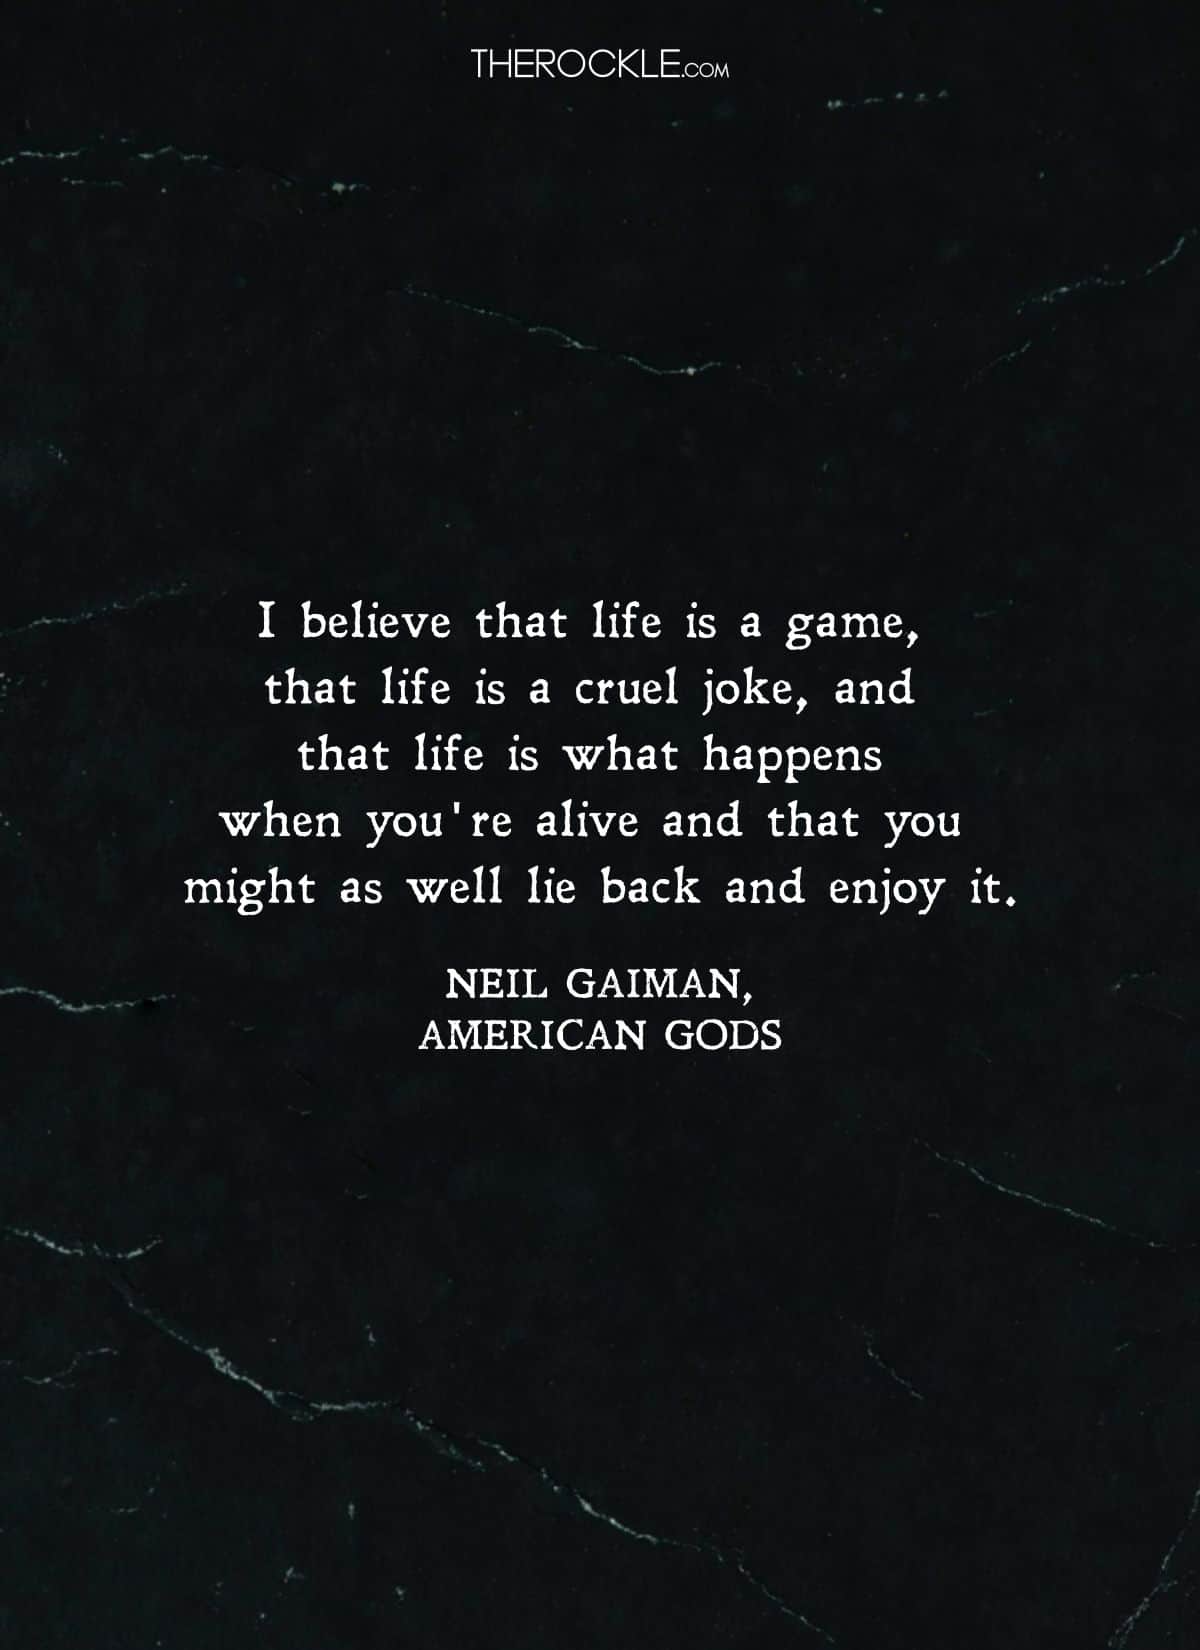 Quote about life's absurdity from the book American Gods